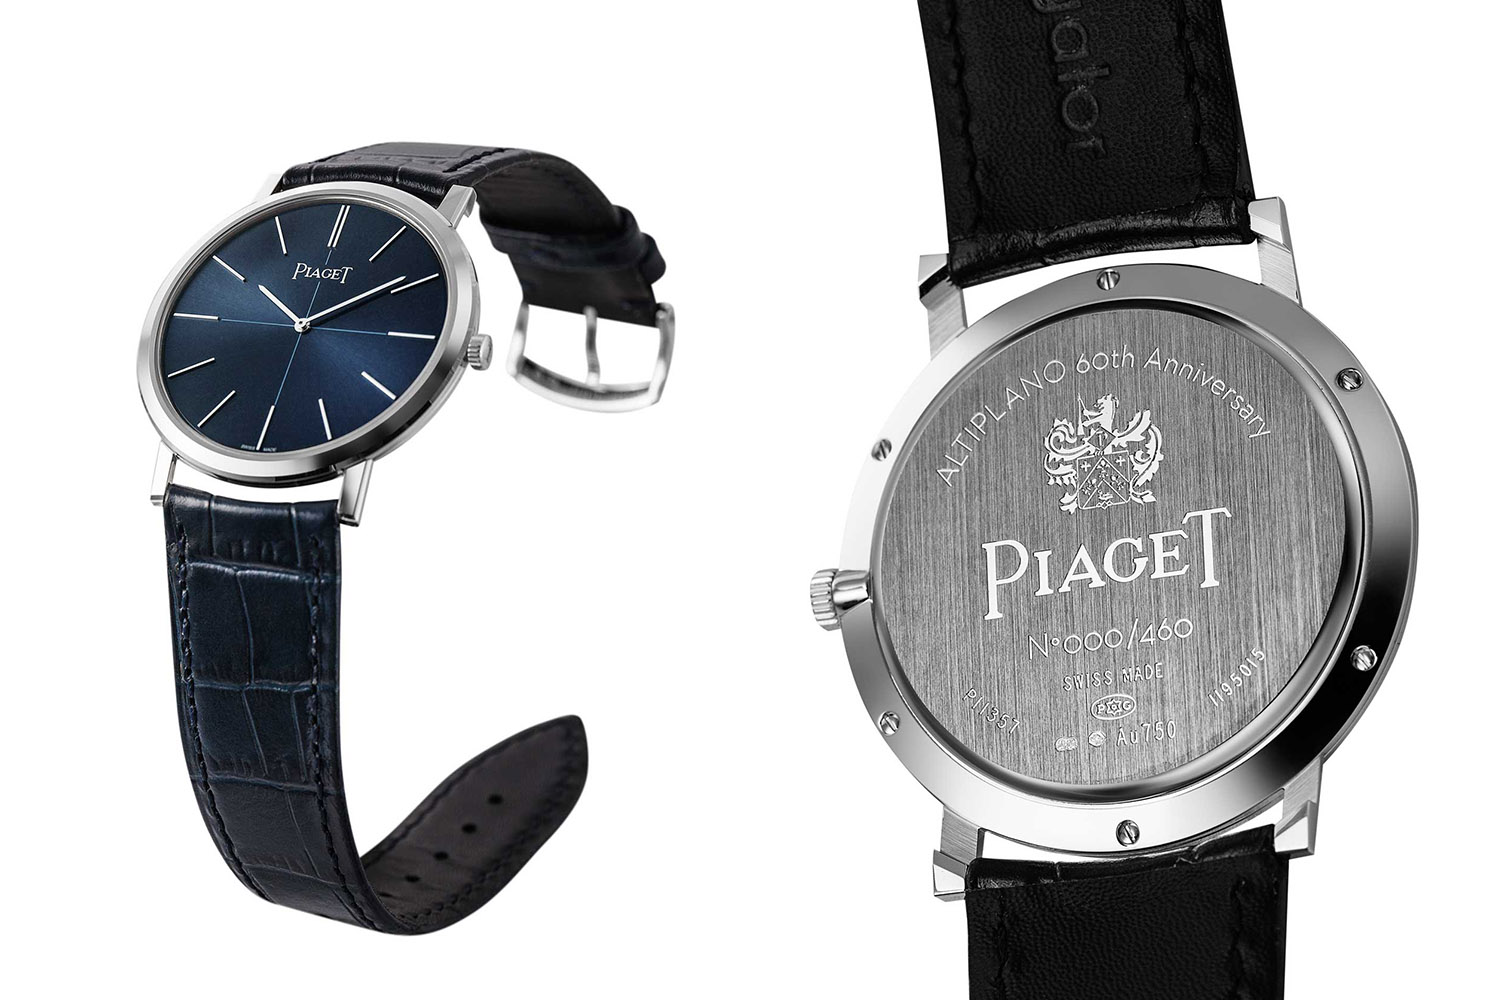 Piaget Altiplano 60th anniversary collection - Pre-SIHH 2017